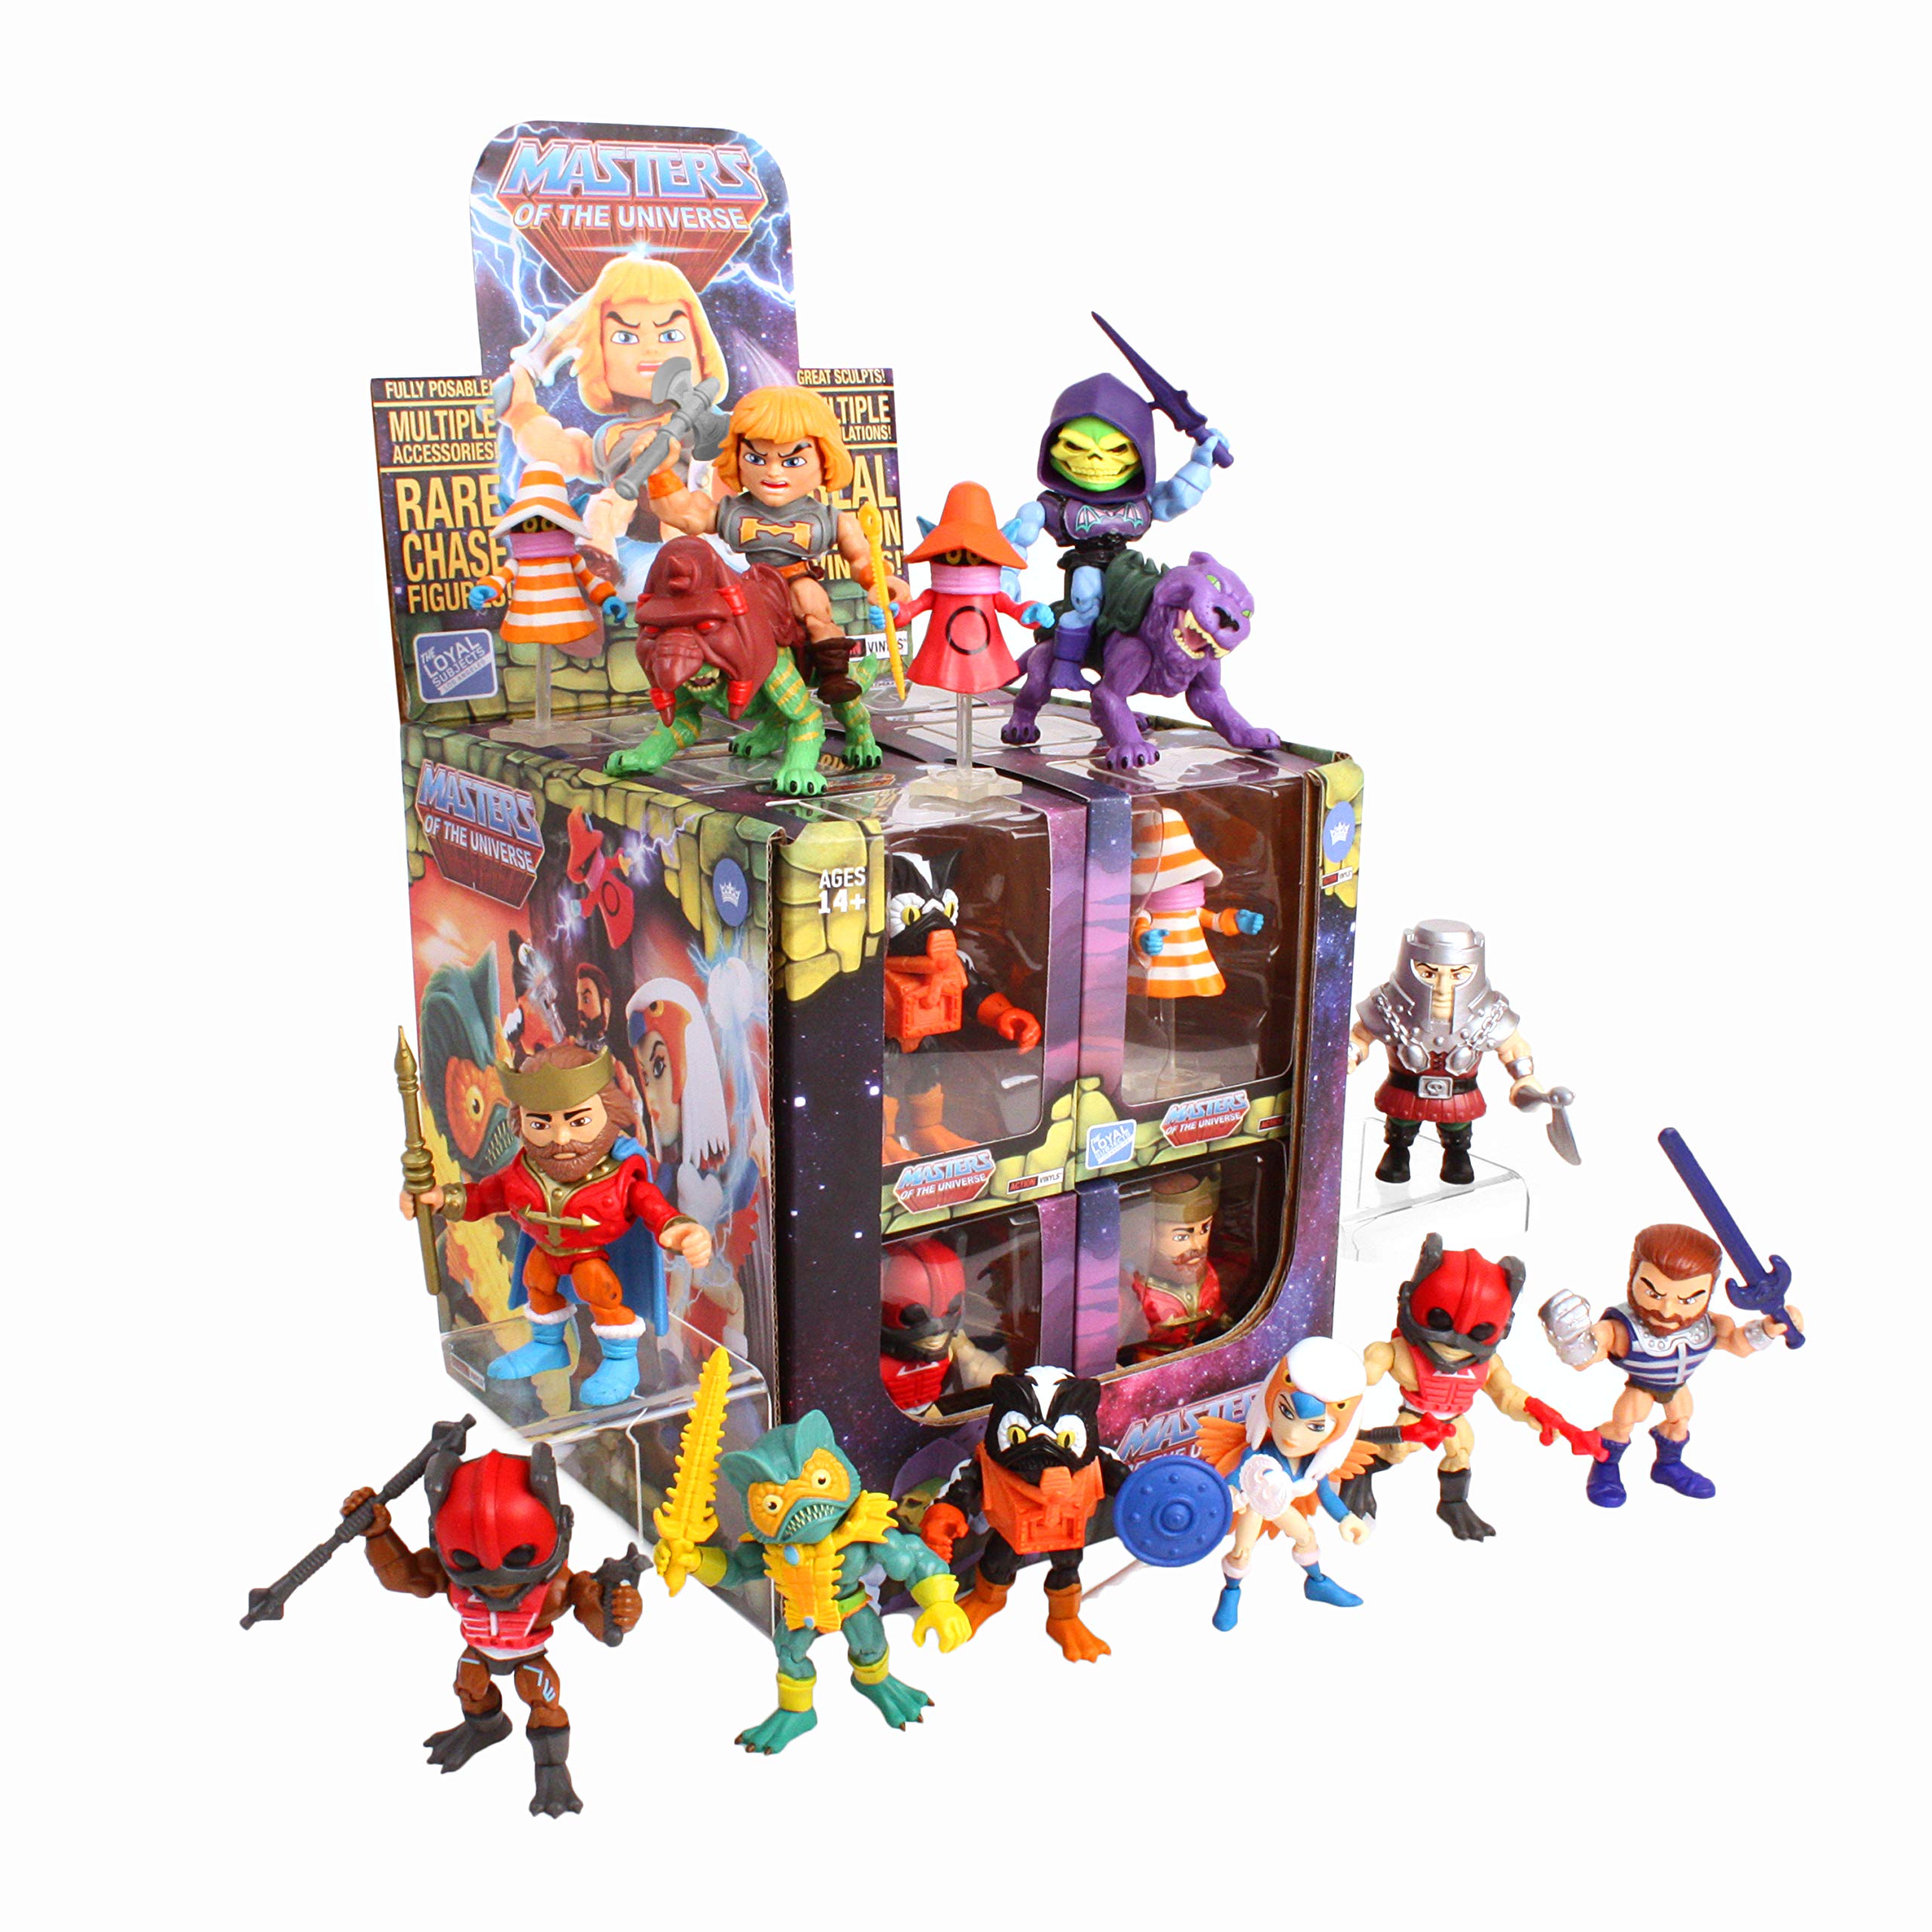 The Loyal Subjects Masters of The Universe Wave 2アクションビニールウィンドウボックス詰め合わせ 12体